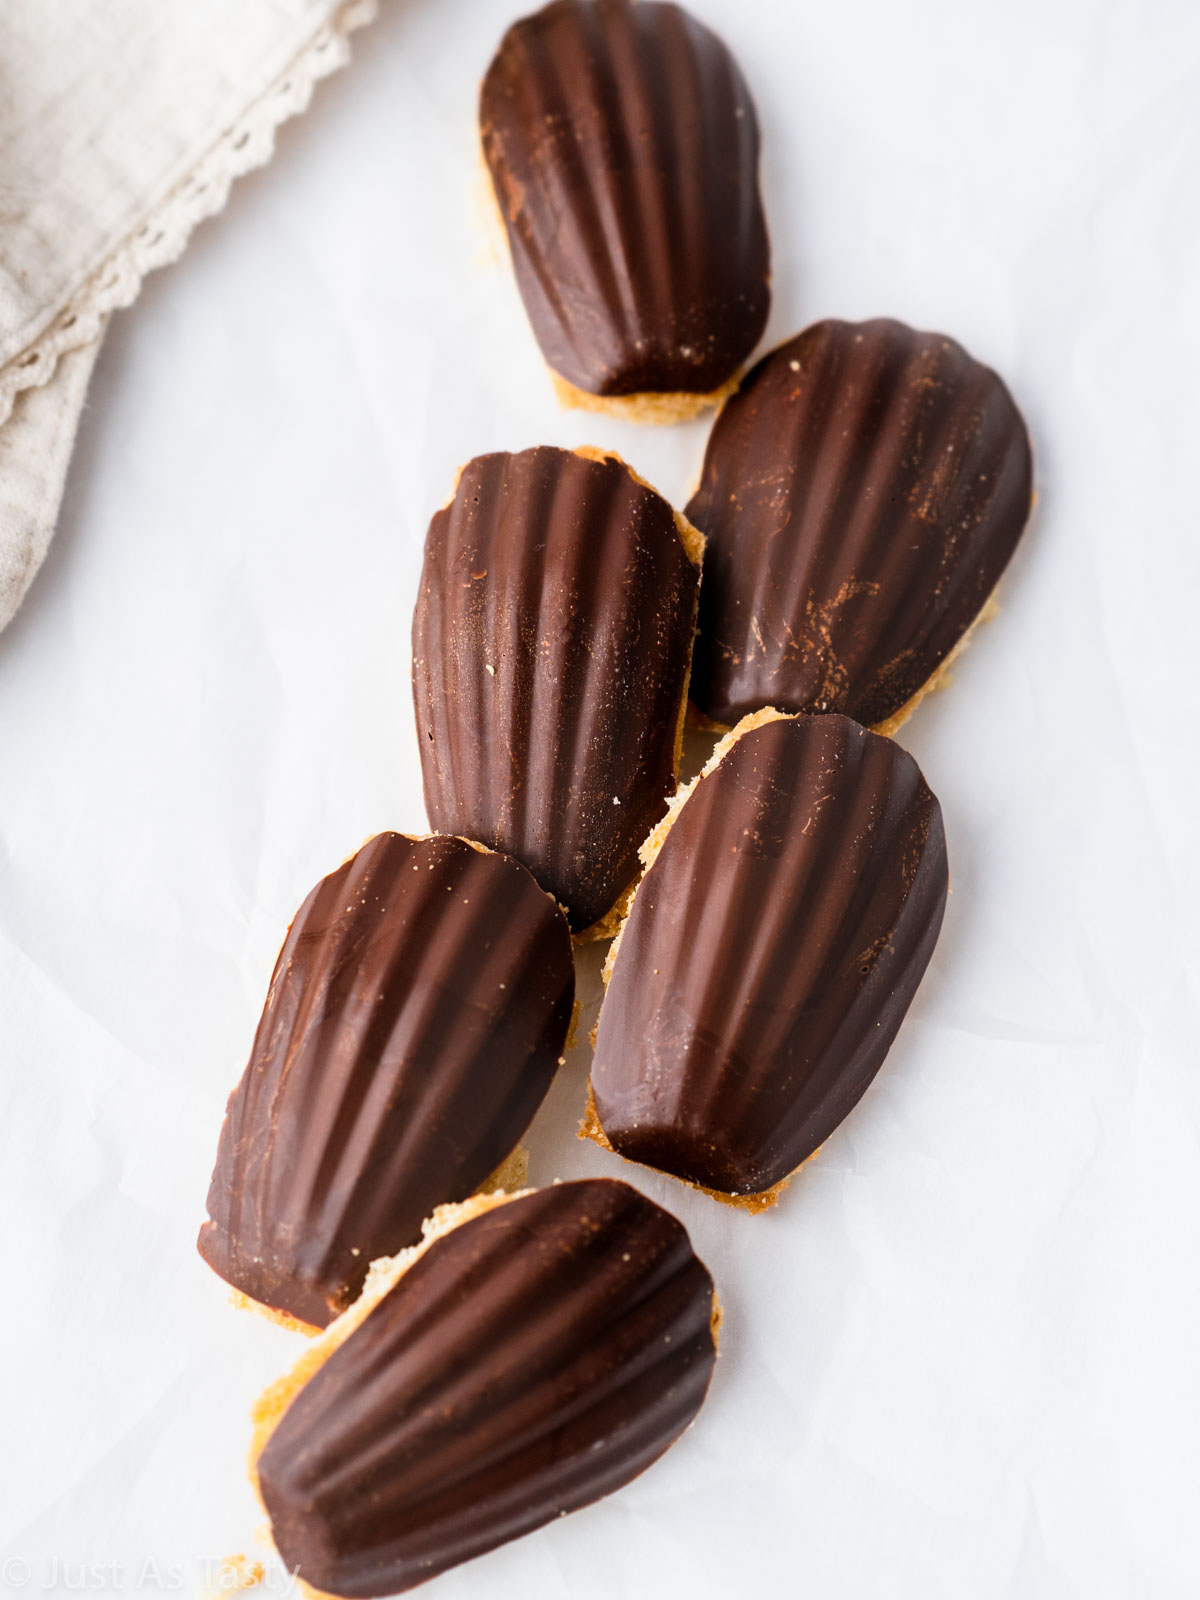 Chocolate dipped madeleines on a white surface. 